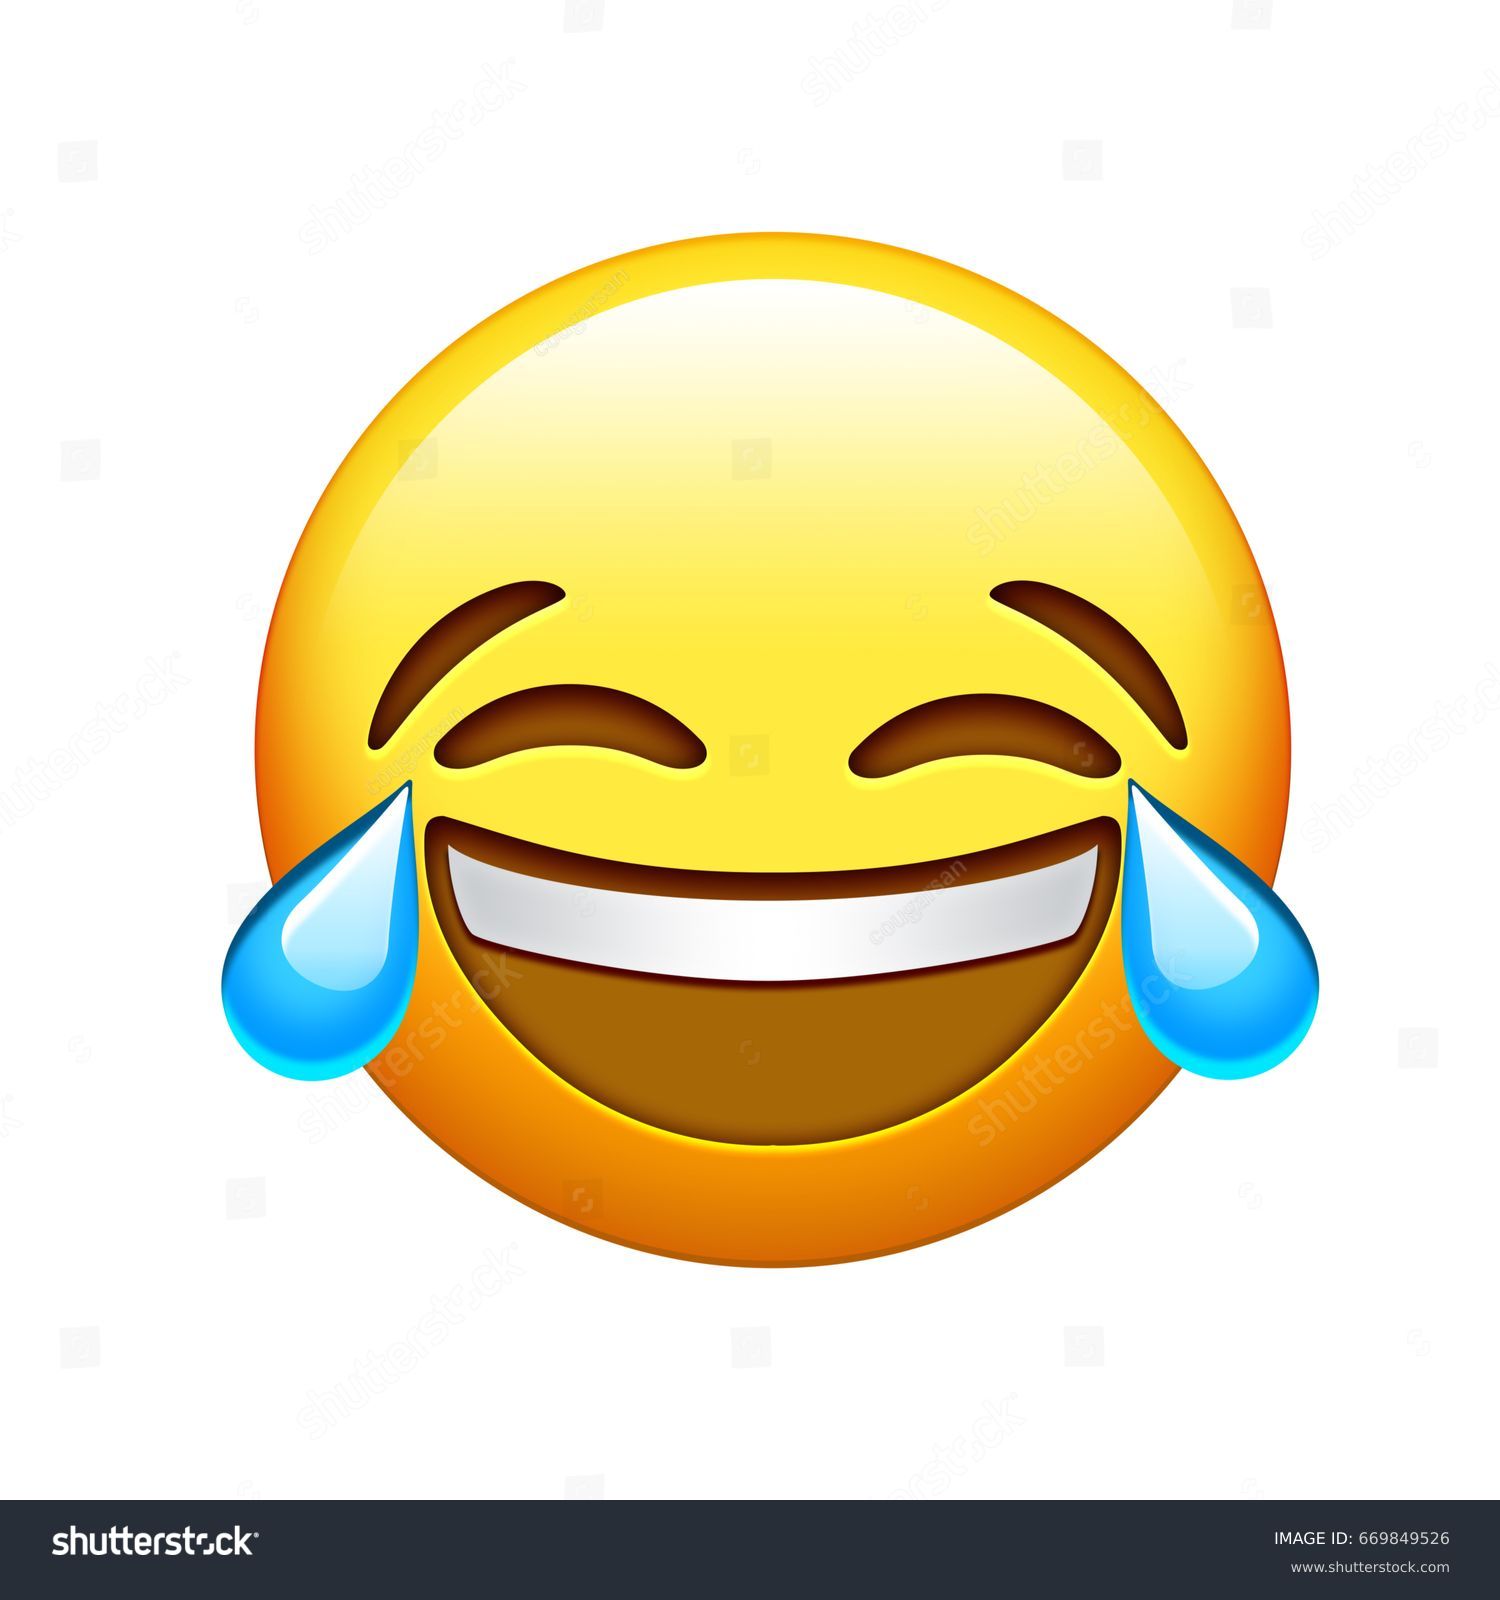 stock-photo-the-emoji-yellow-face-lol-laugh-and-crying-tear-icon-669849526.jpg